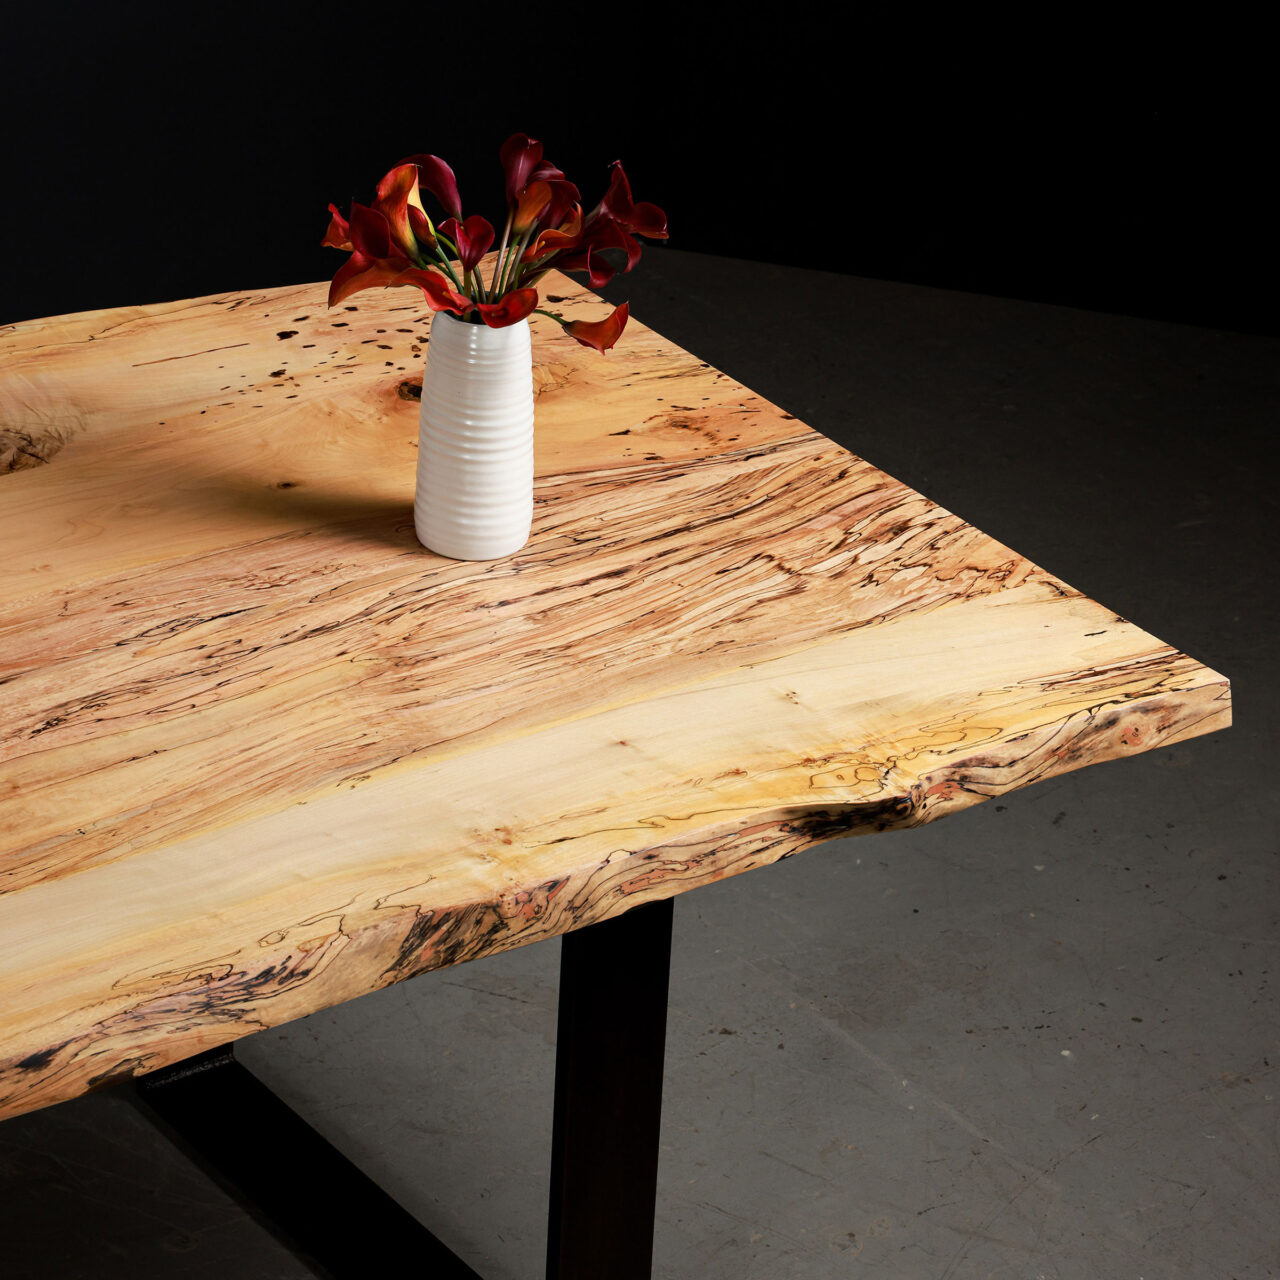 Custom live edge table in spalted maple, with black metal frame legs, and a white vase on top